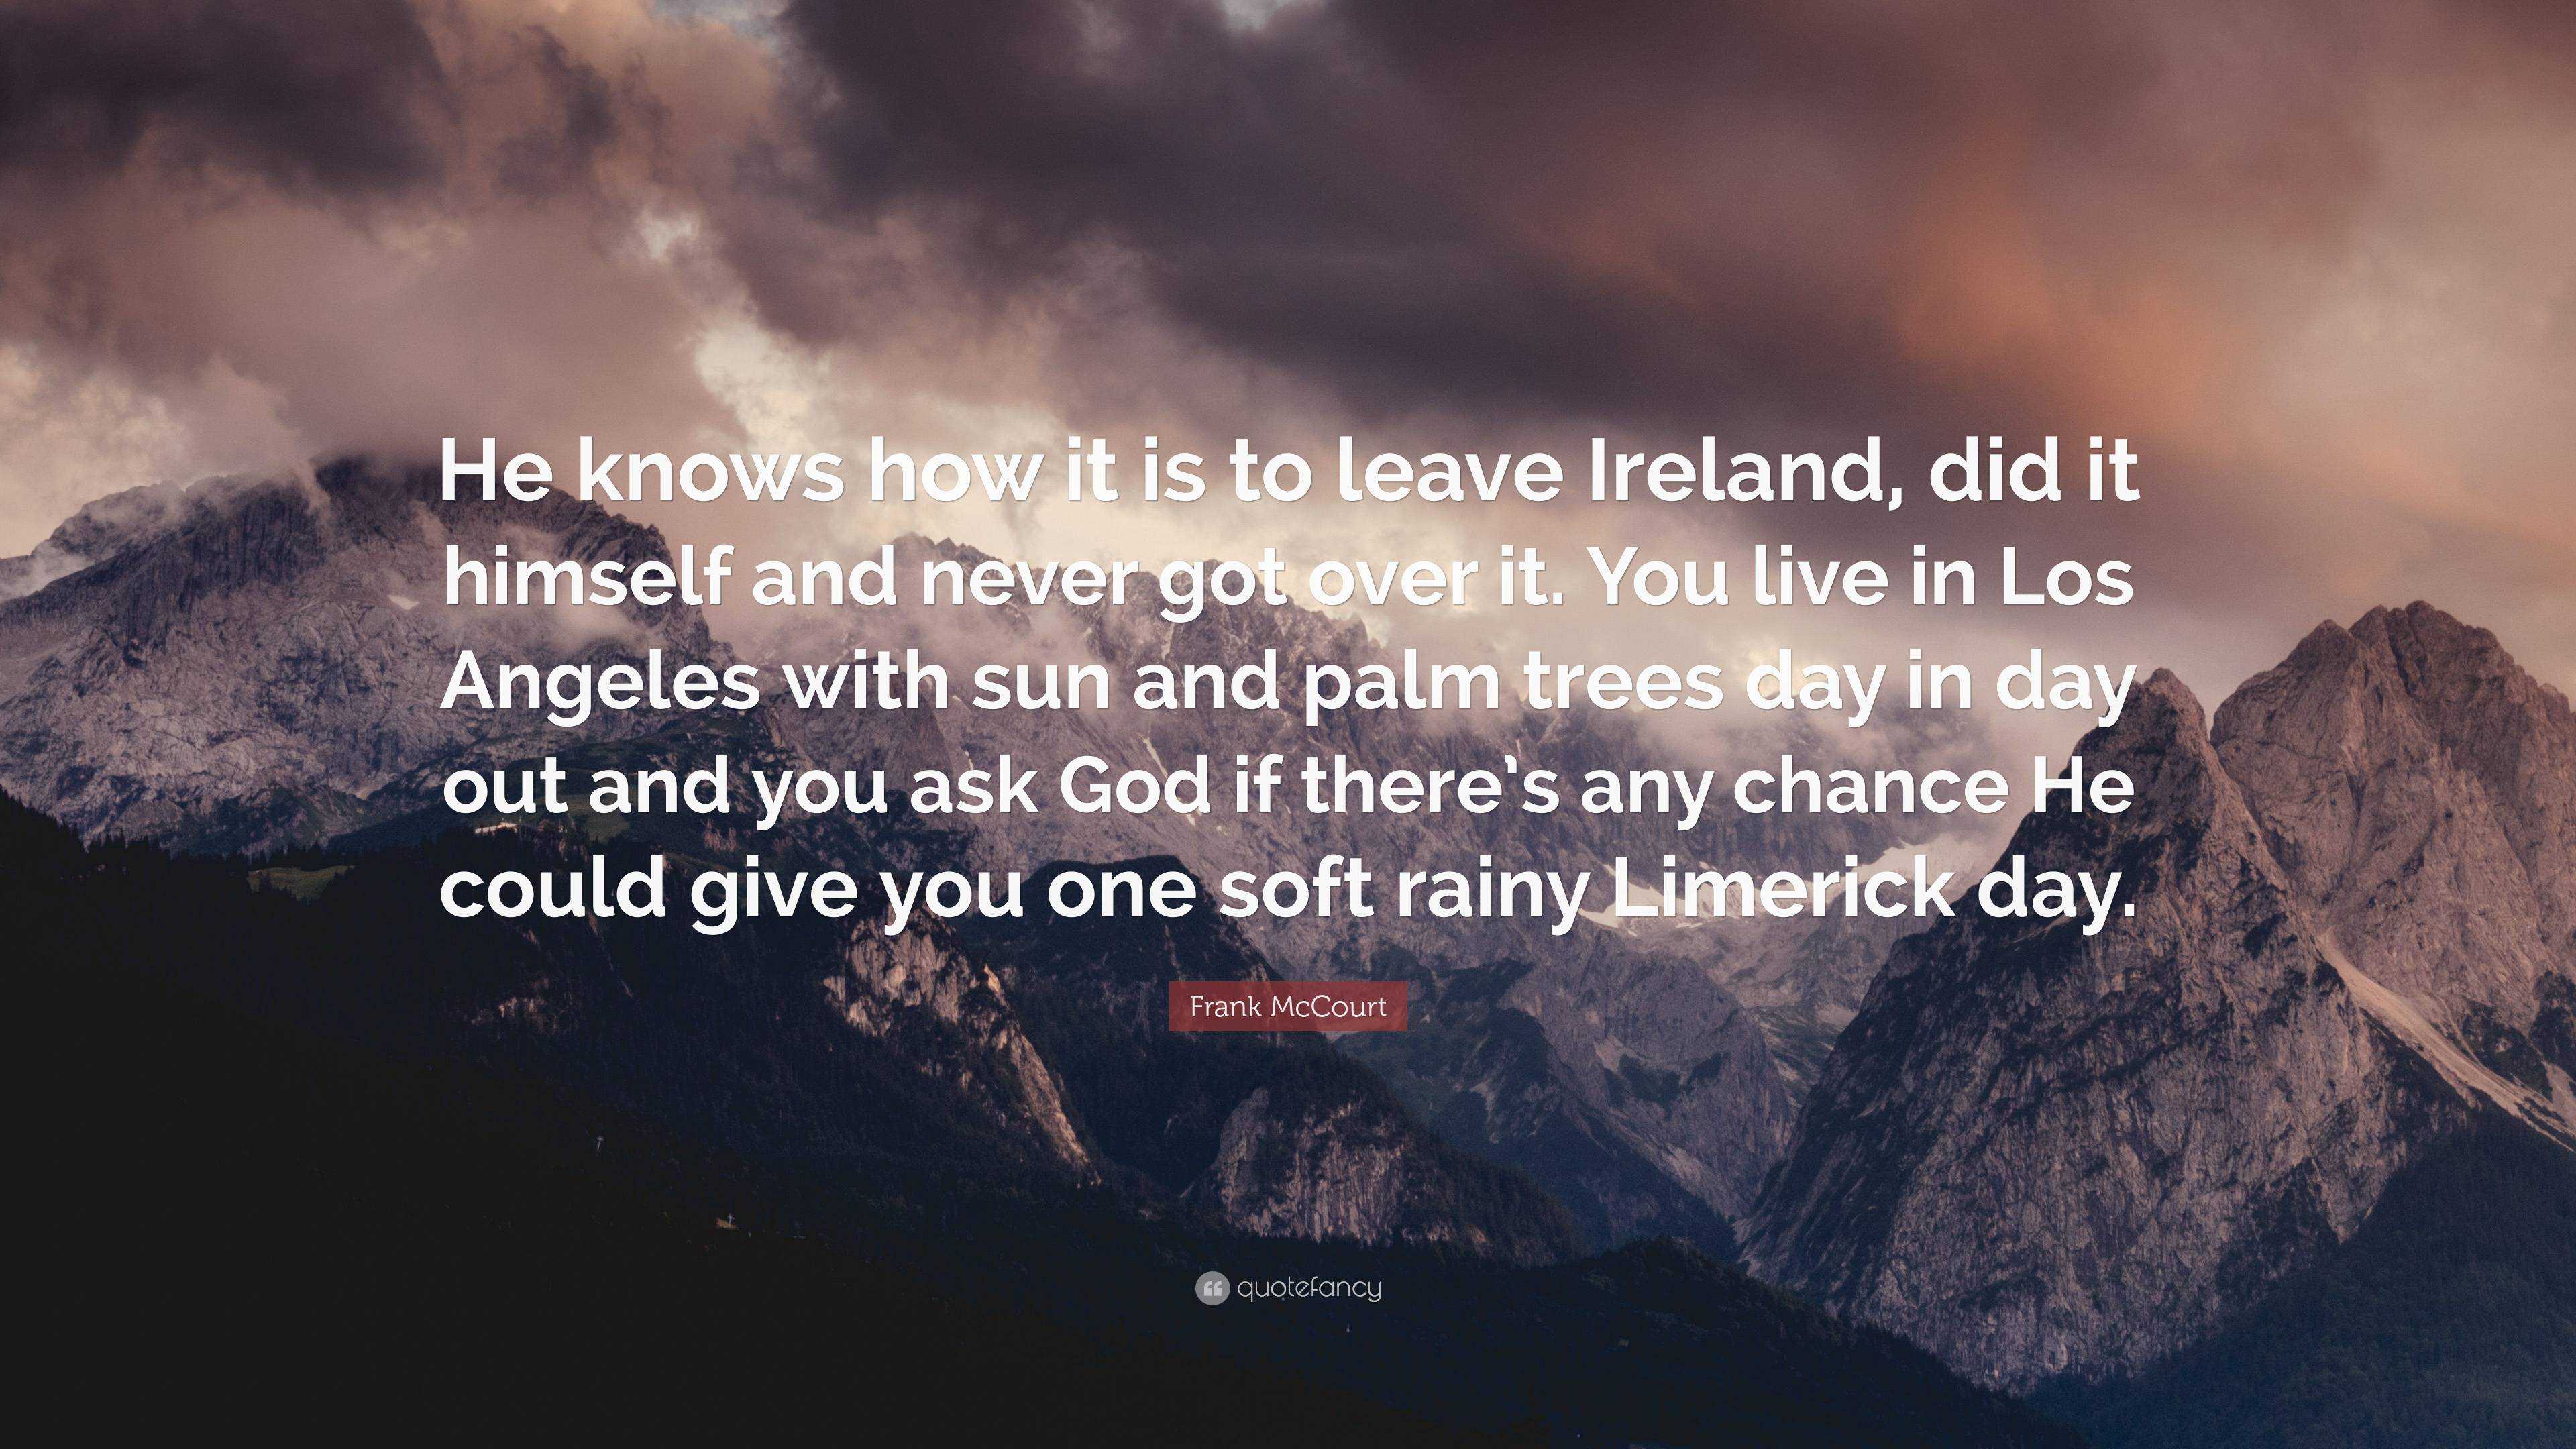 Limerick Quotes - 19 quotes on Limerick Science Quotes